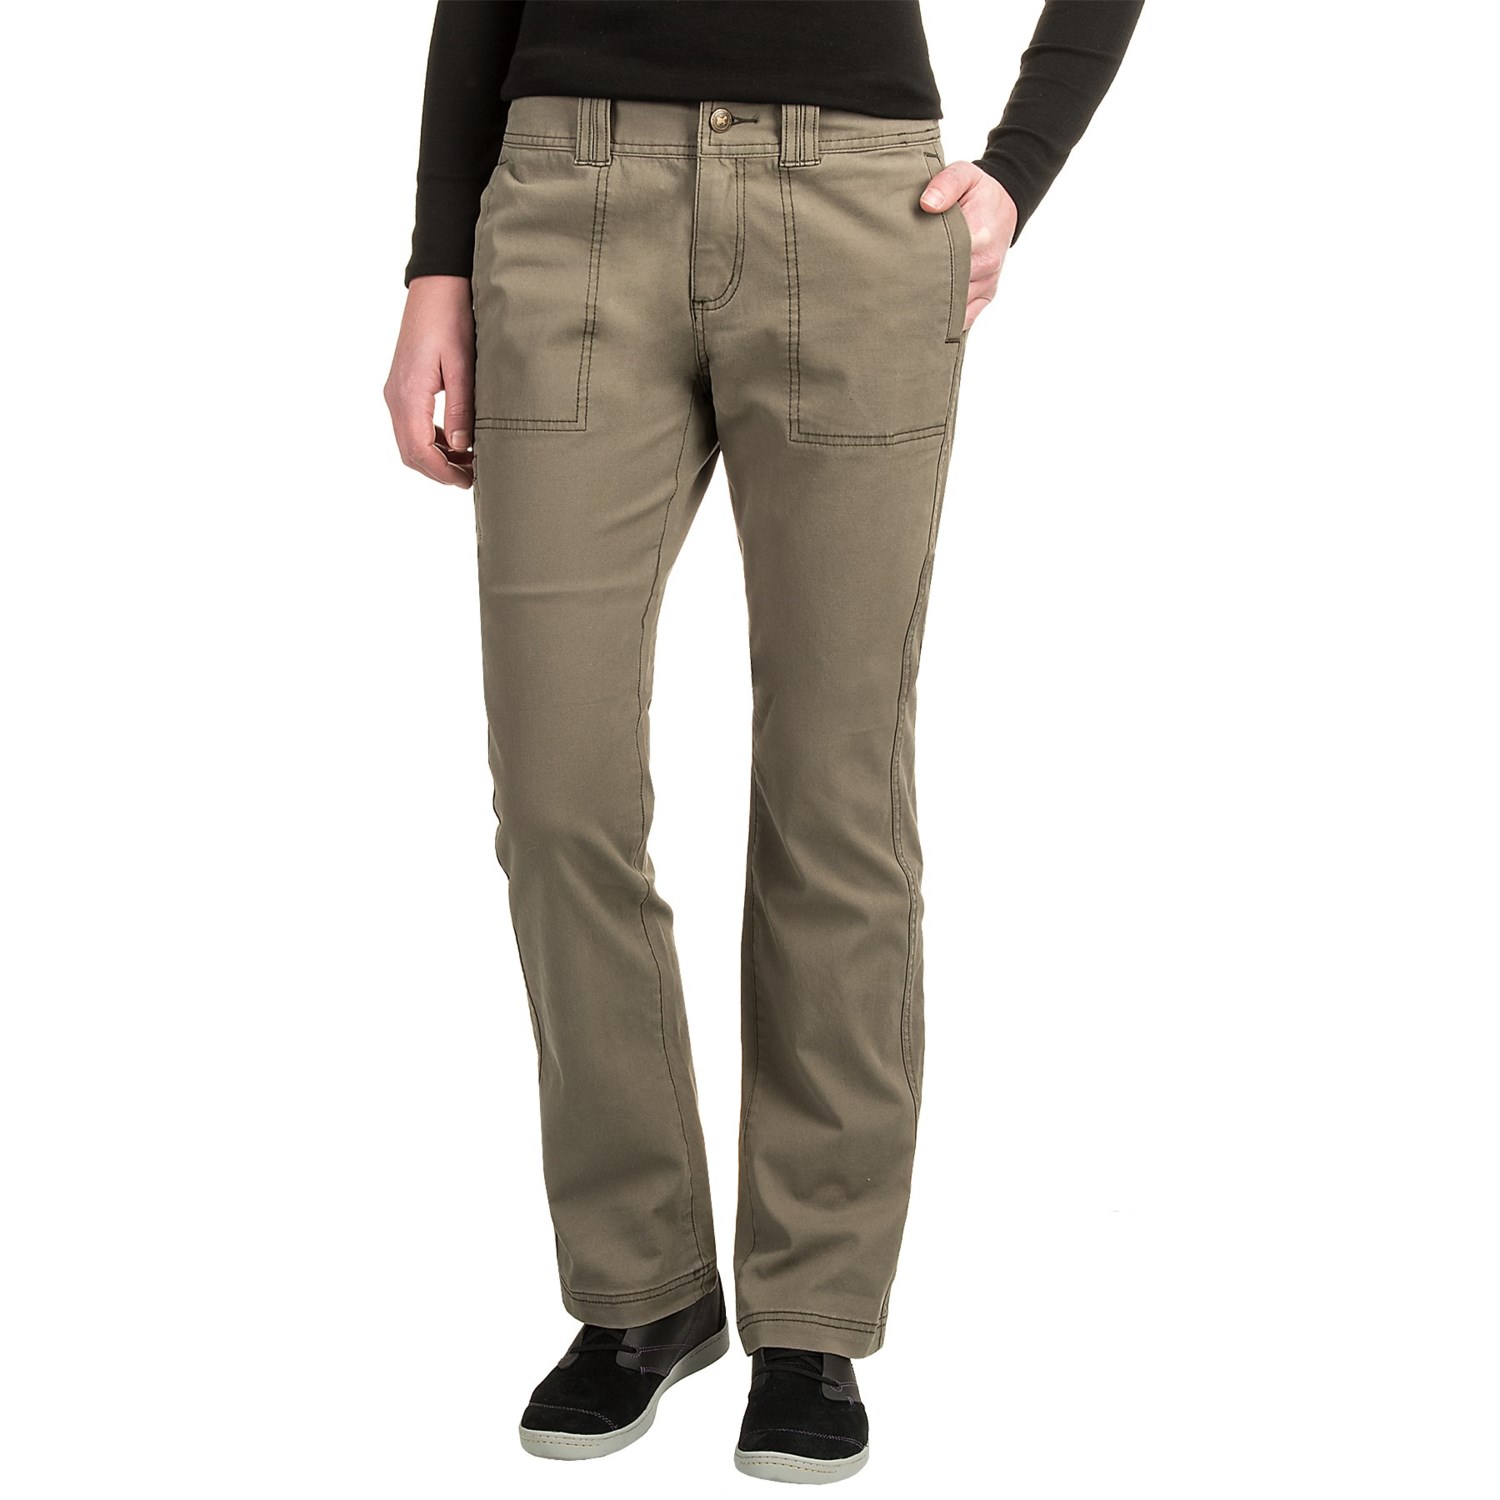 Royal Robbins Billy Goat® Stretch Pants (For Women) - Save 48%